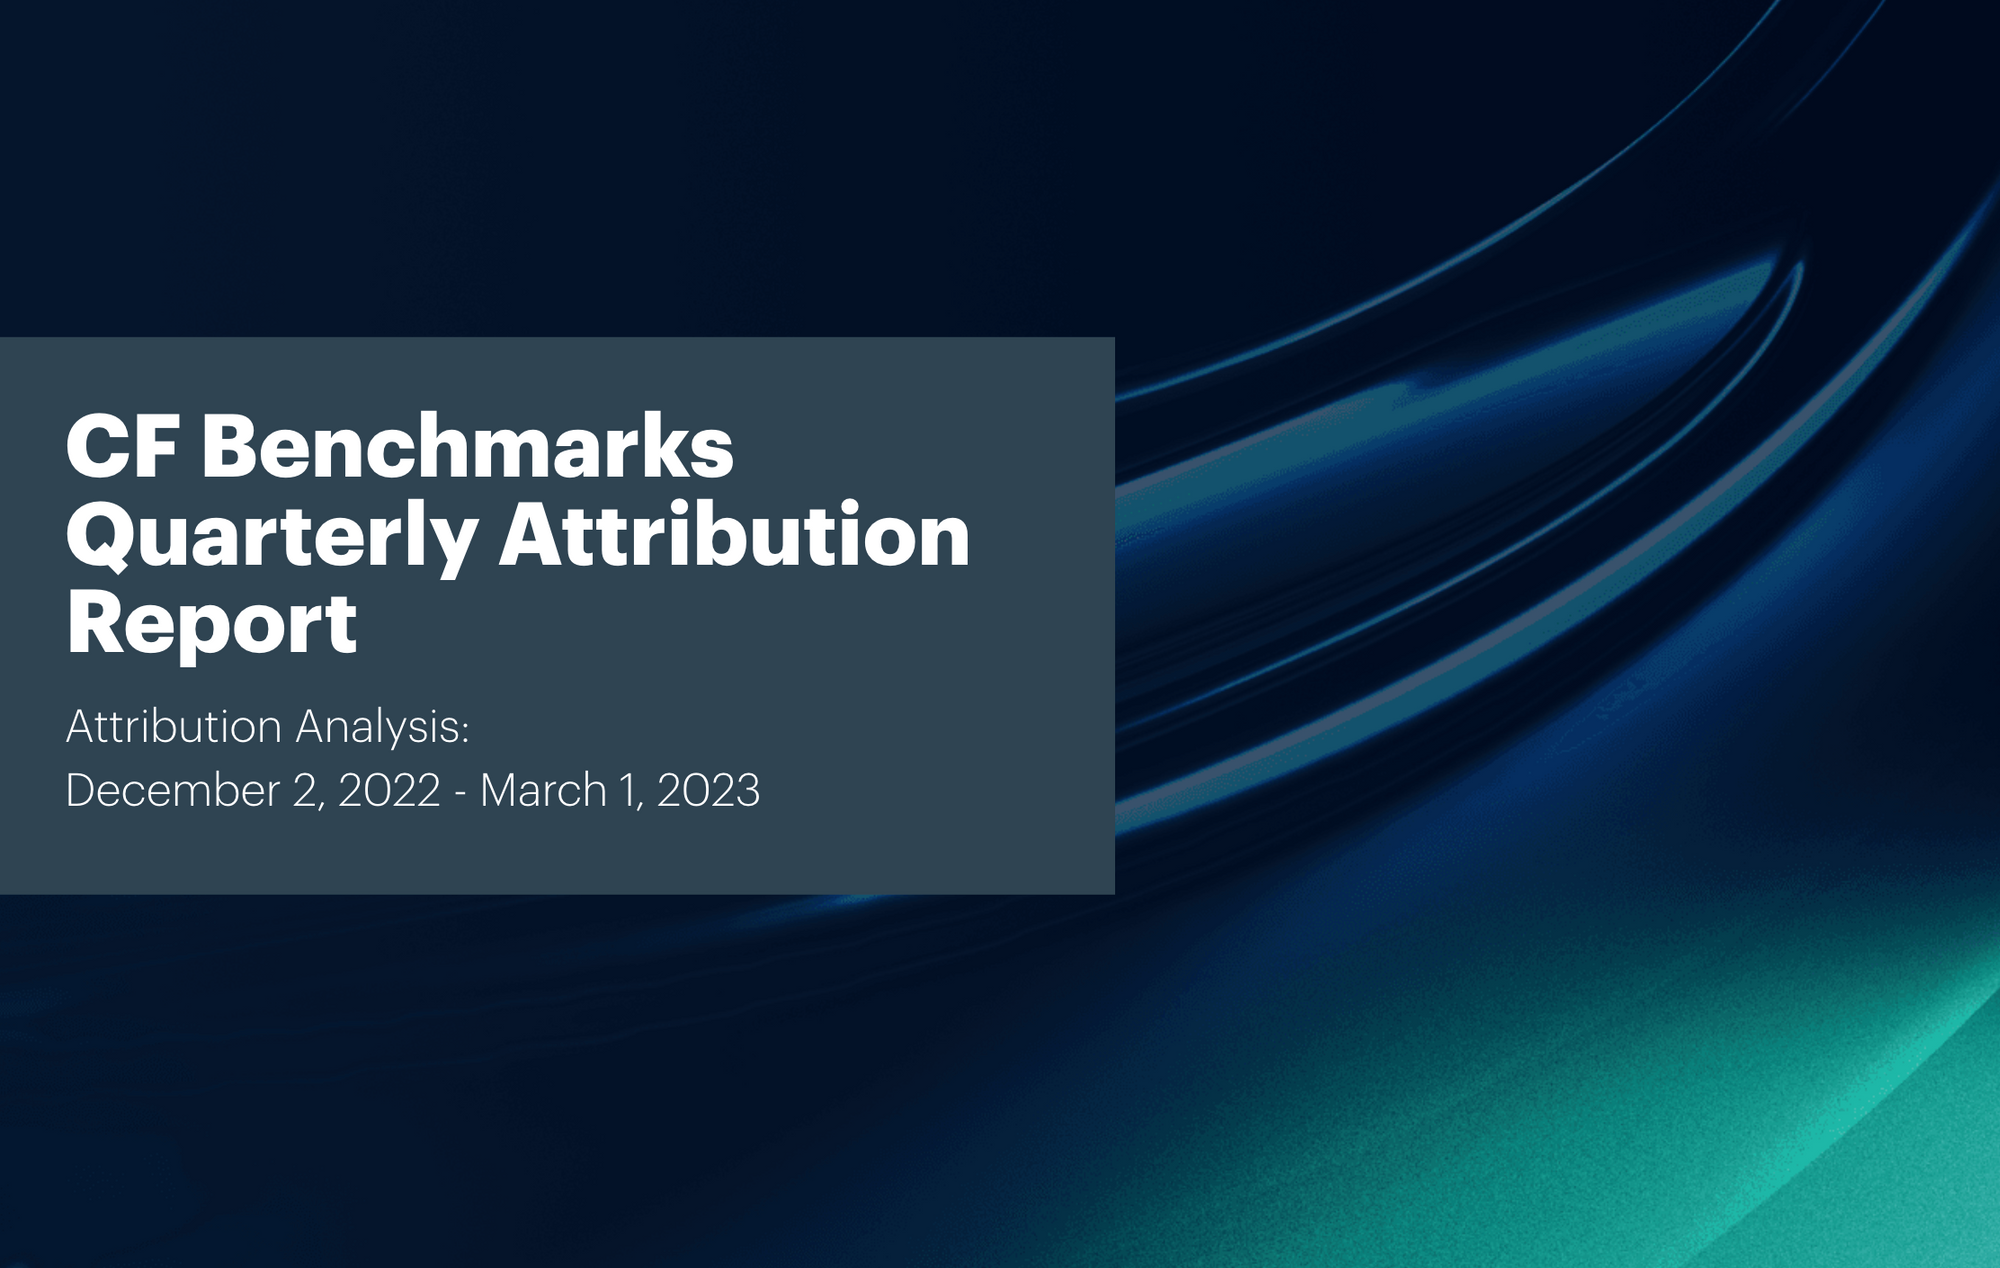 CF Benchmarks Quarterly Attribution Reports - March 2023